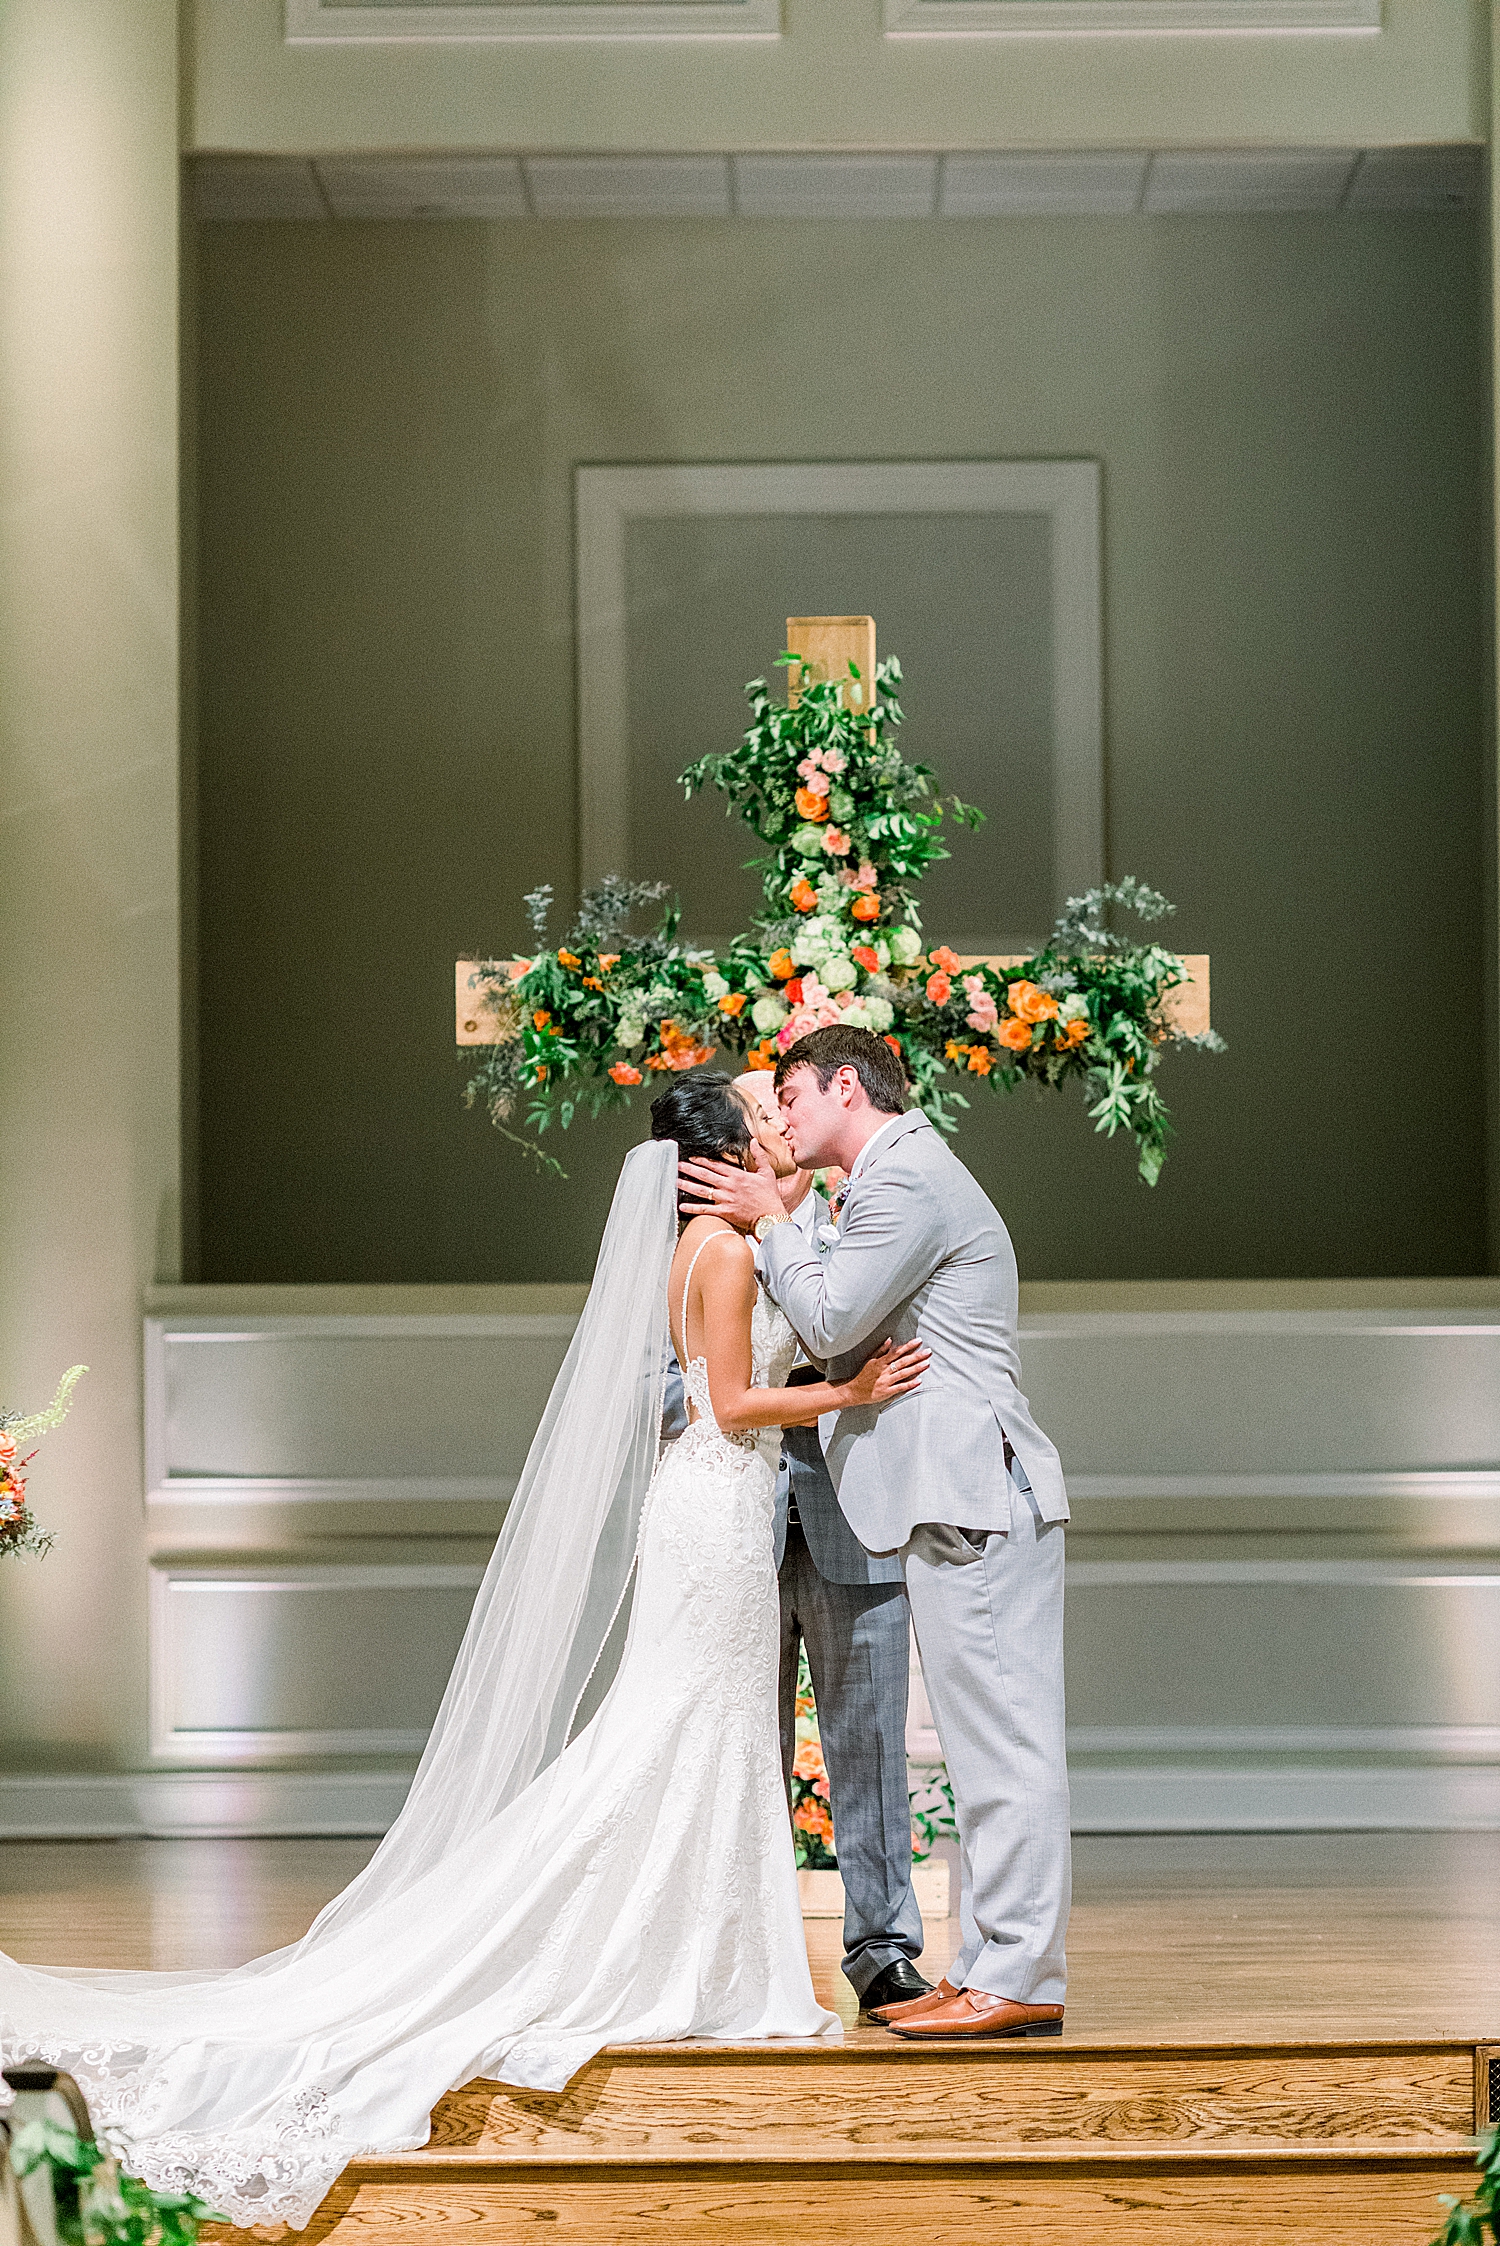 newlyweds kiss by floral covered cross at church wedding